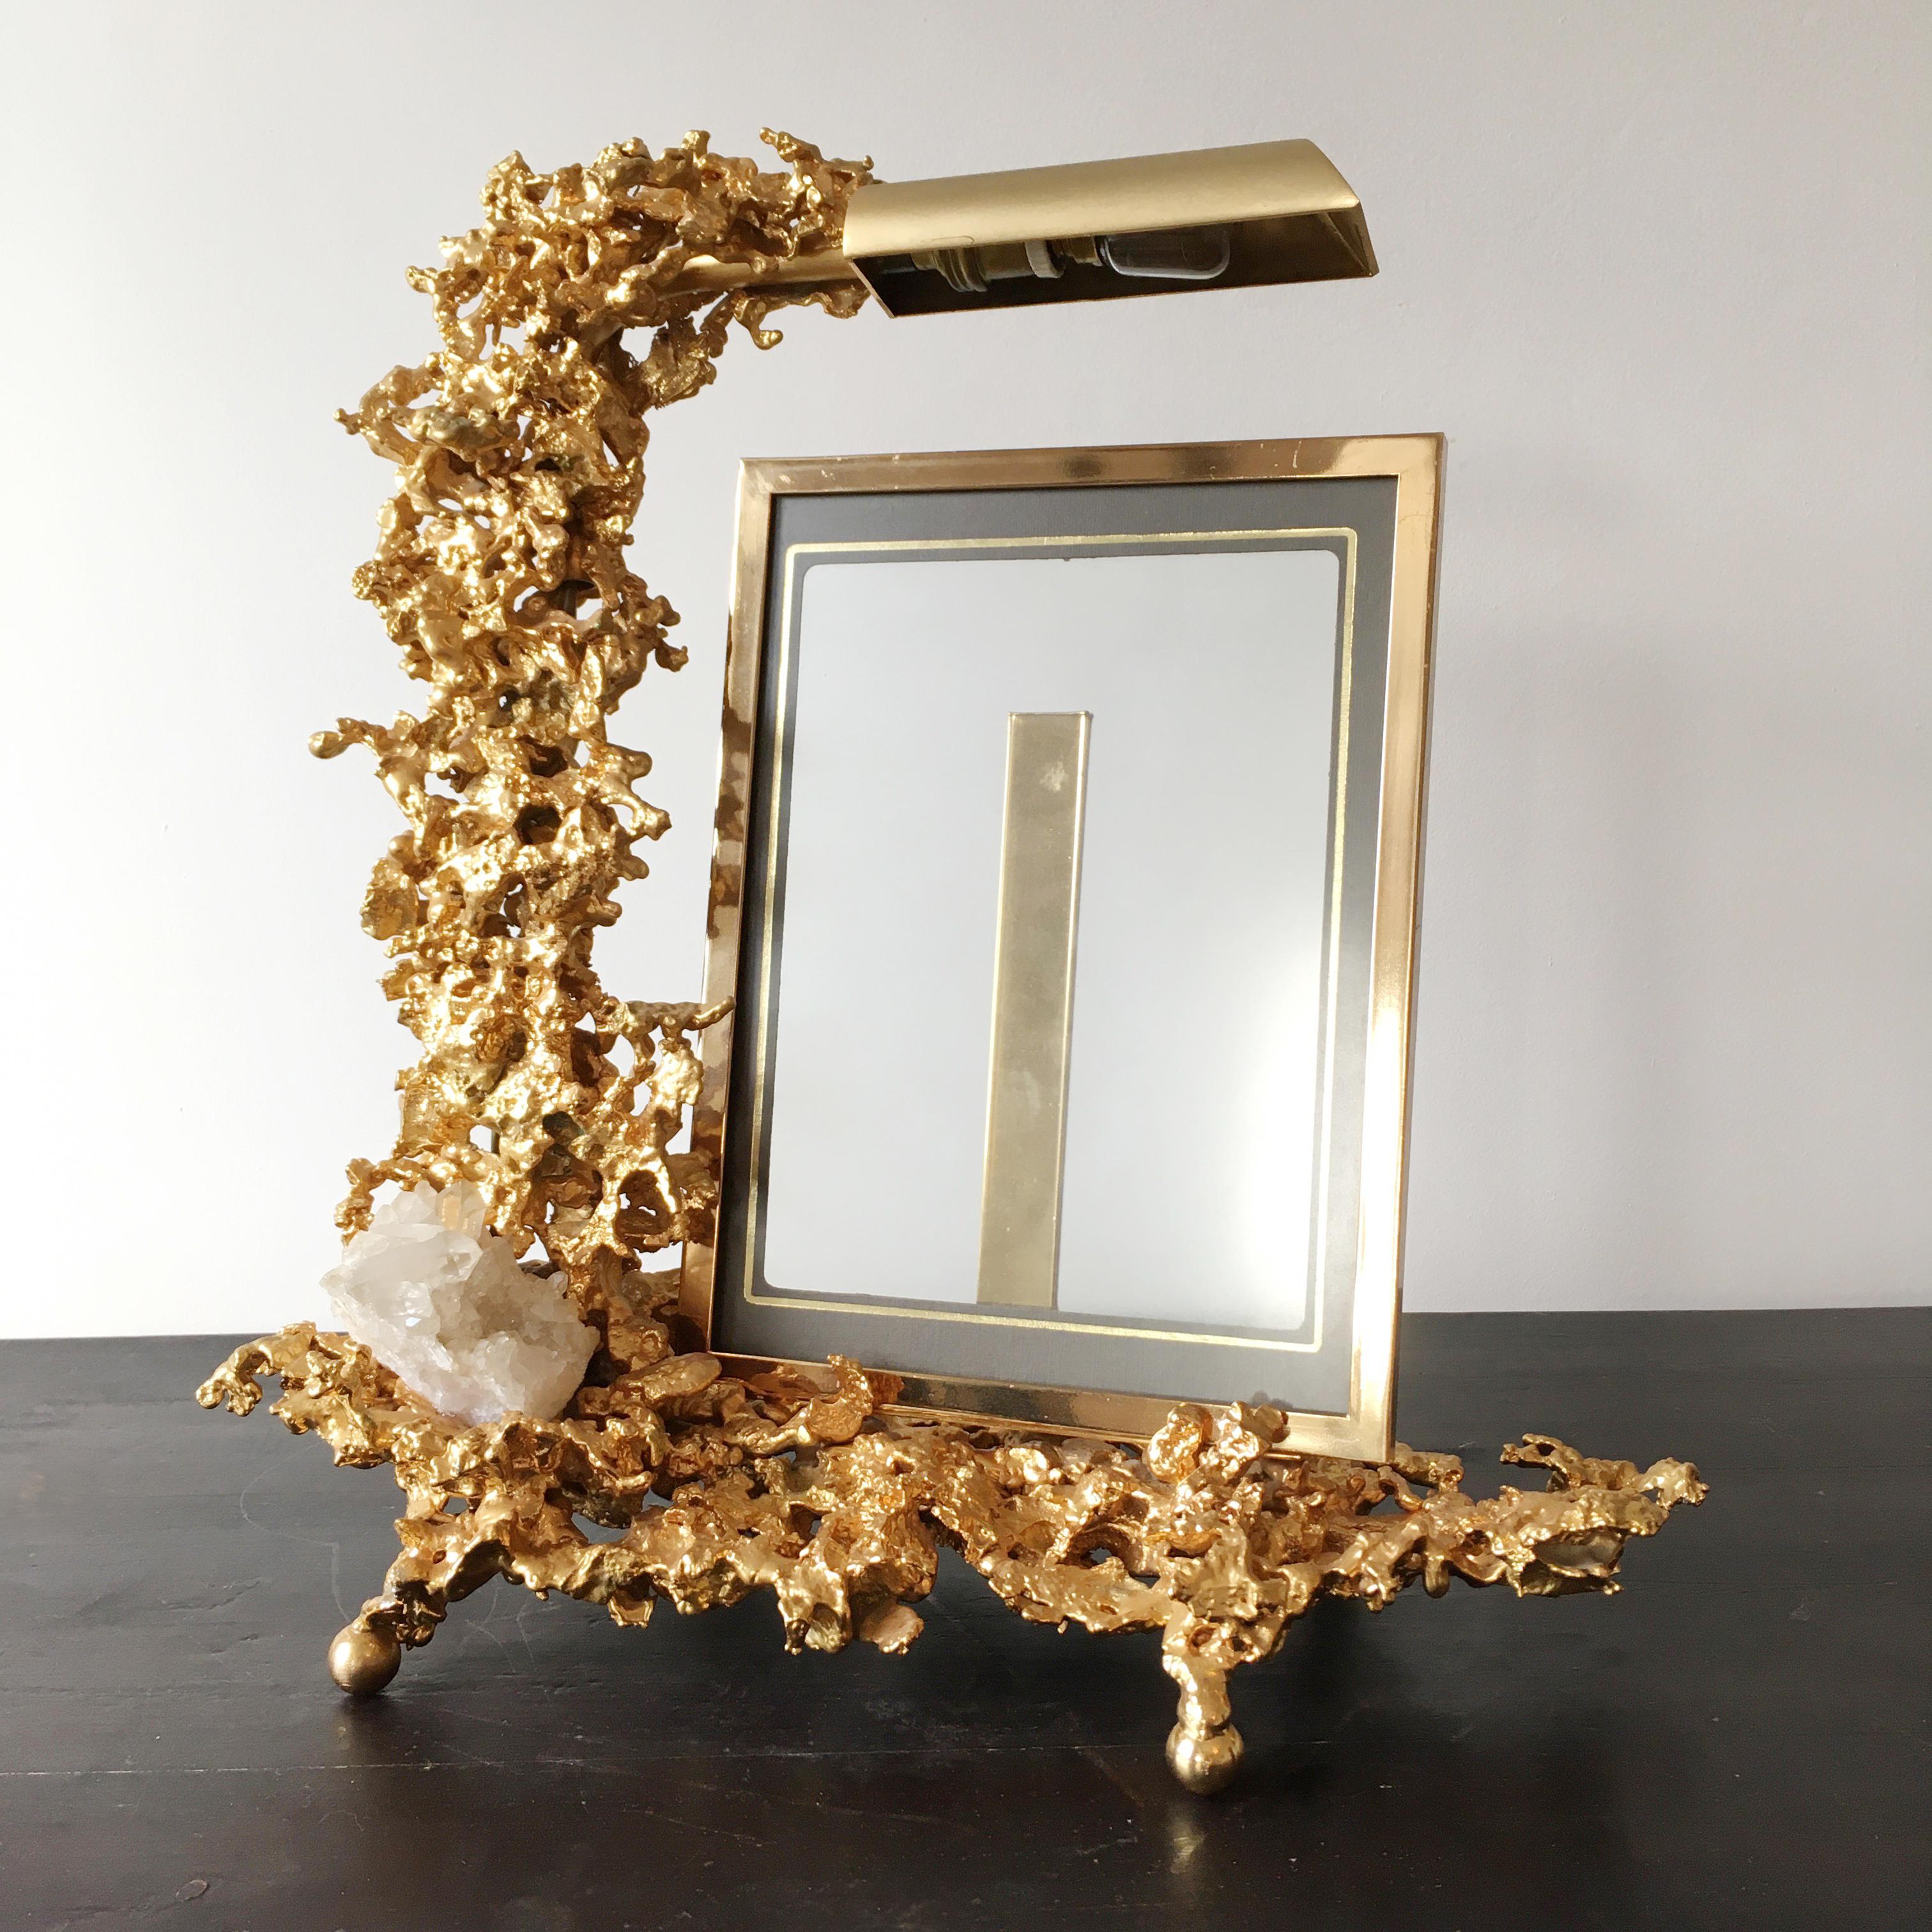 Claude Victor Boeltz sculptural 24-karat gold-plated exploded photograph frame with lamp and rock crystal inclusions.
The natural rock quartz crystal wands are set into the base.
The adjustable lamp head highlights the matching gold-plated